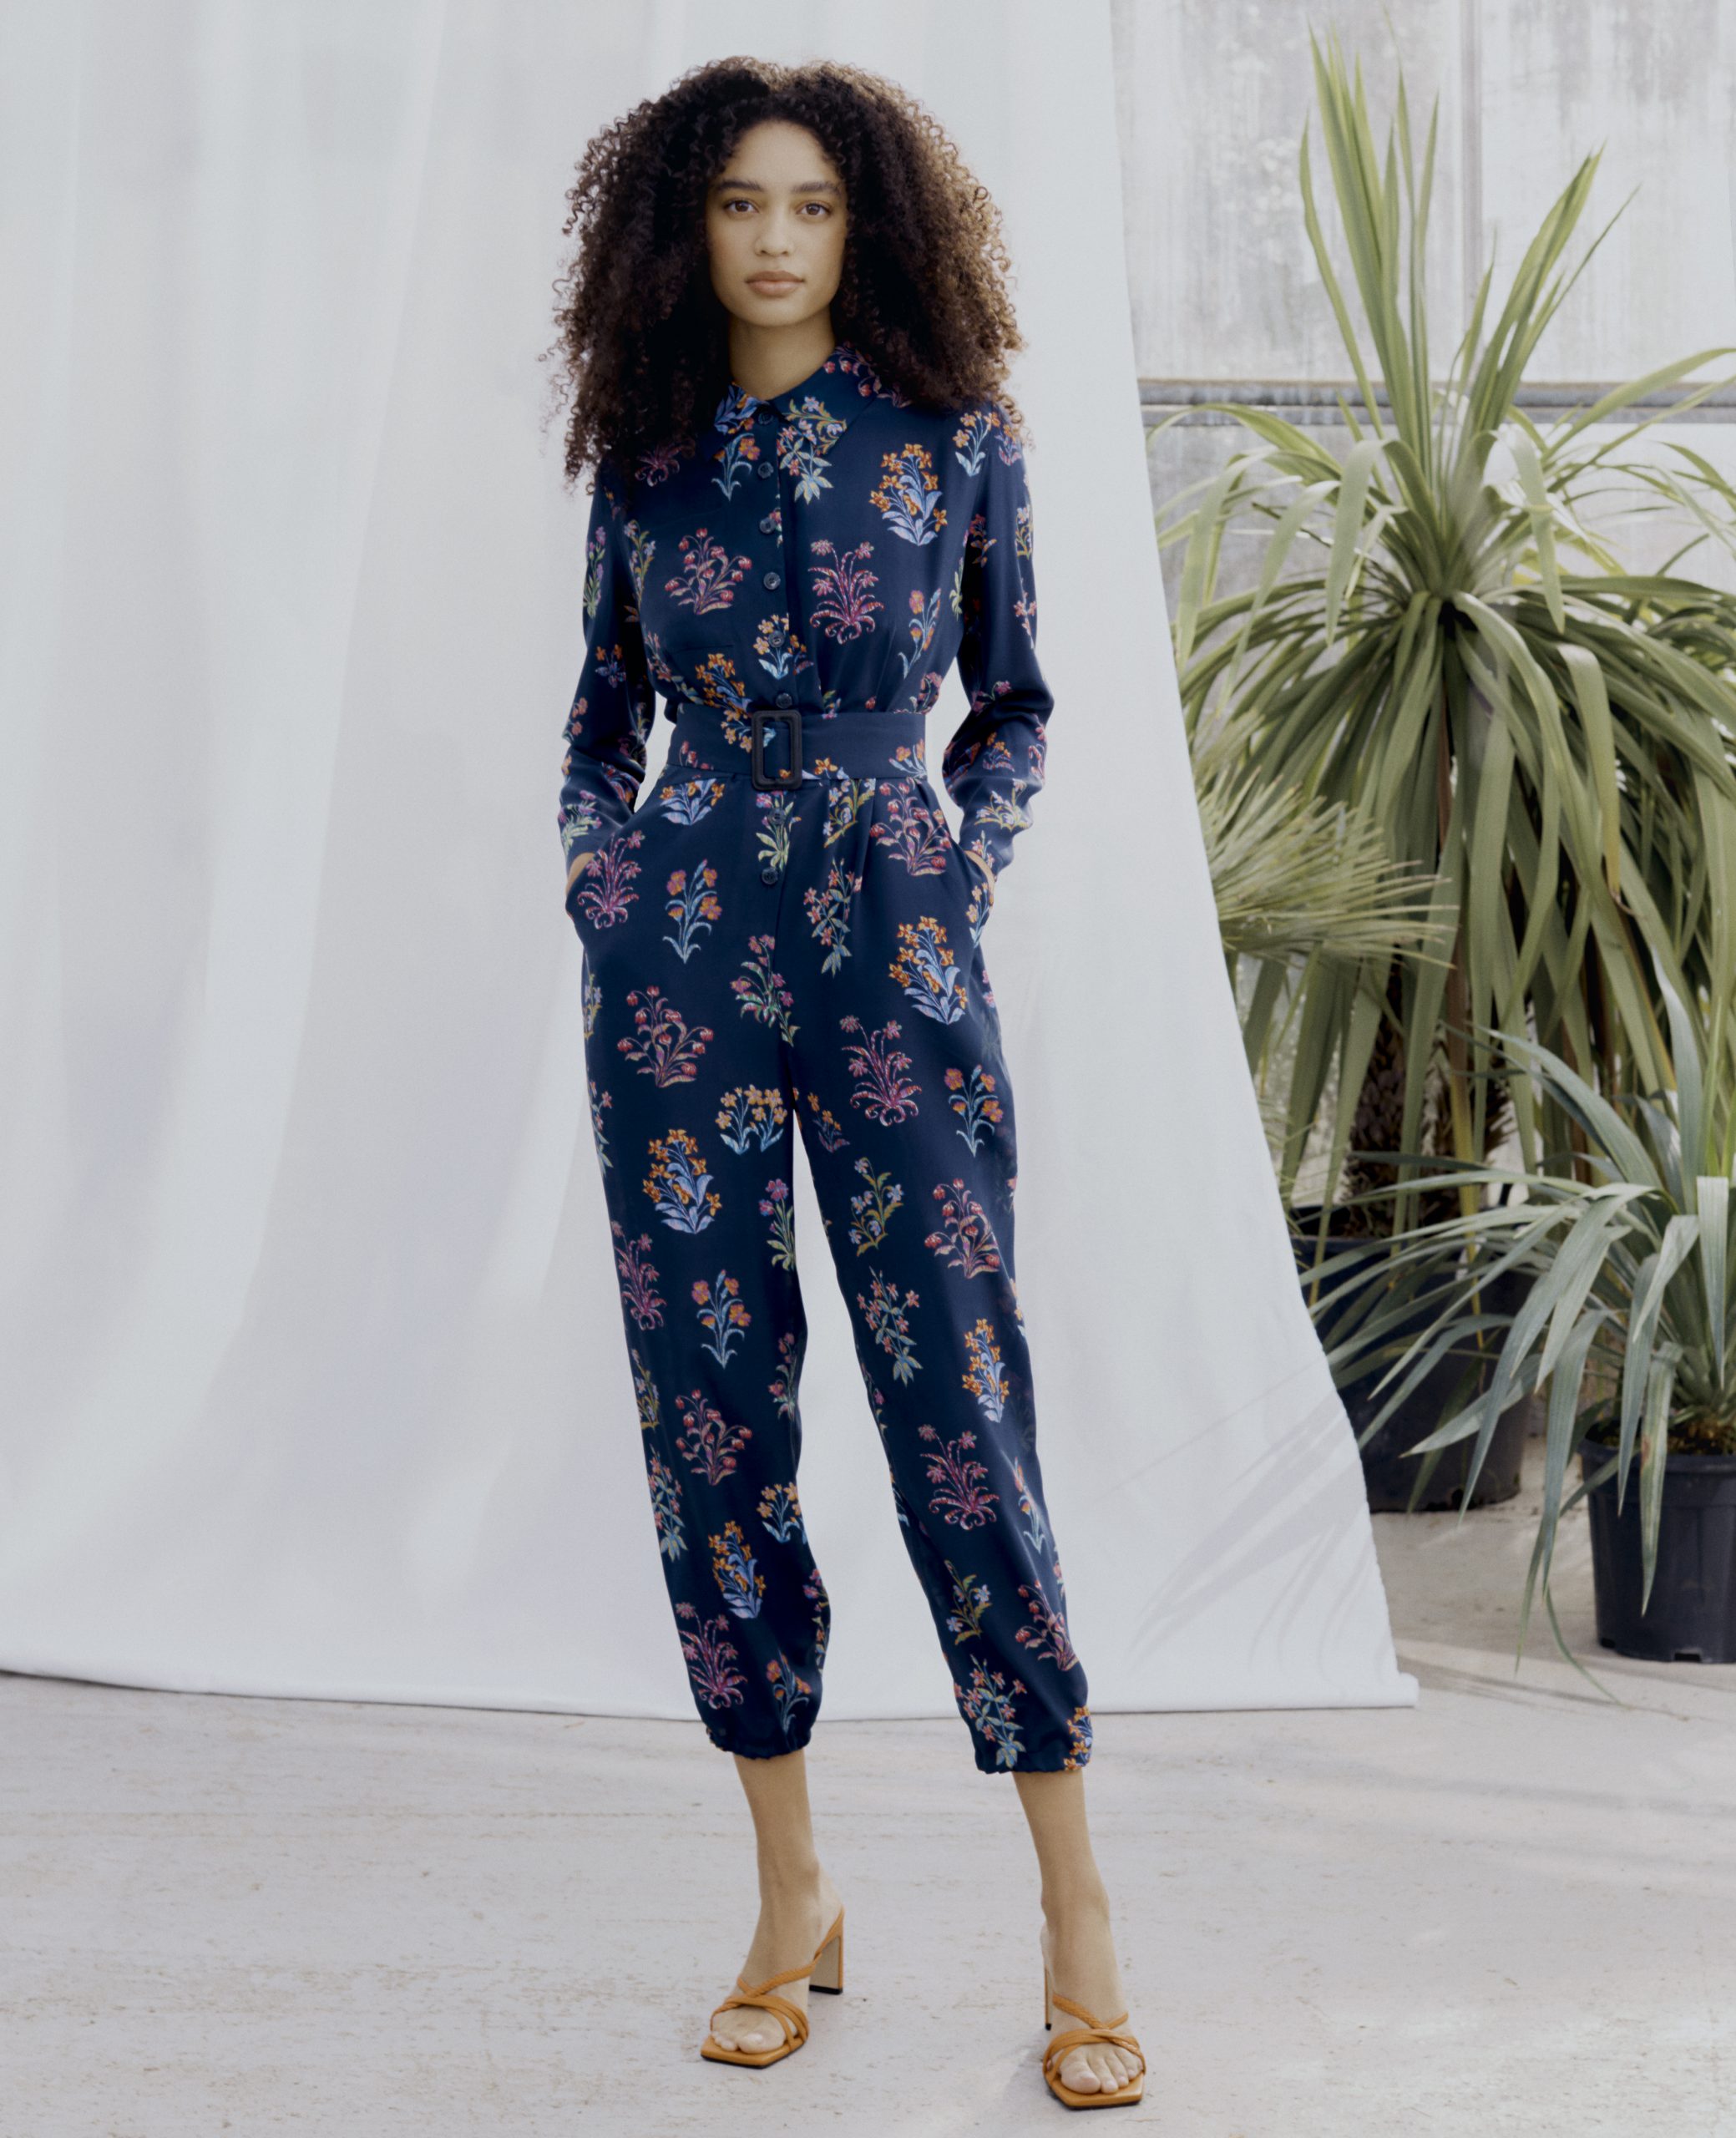 Woman wearing the Zadie Boiler Suit sewing pattern from Liberty Sewing Patterns on The Fold Line. A boilersuit pattern made in lawn cotton, crepe de chine, twill, denim or linen fabrics, featuring front button closure, cropped length, full length sleeves,